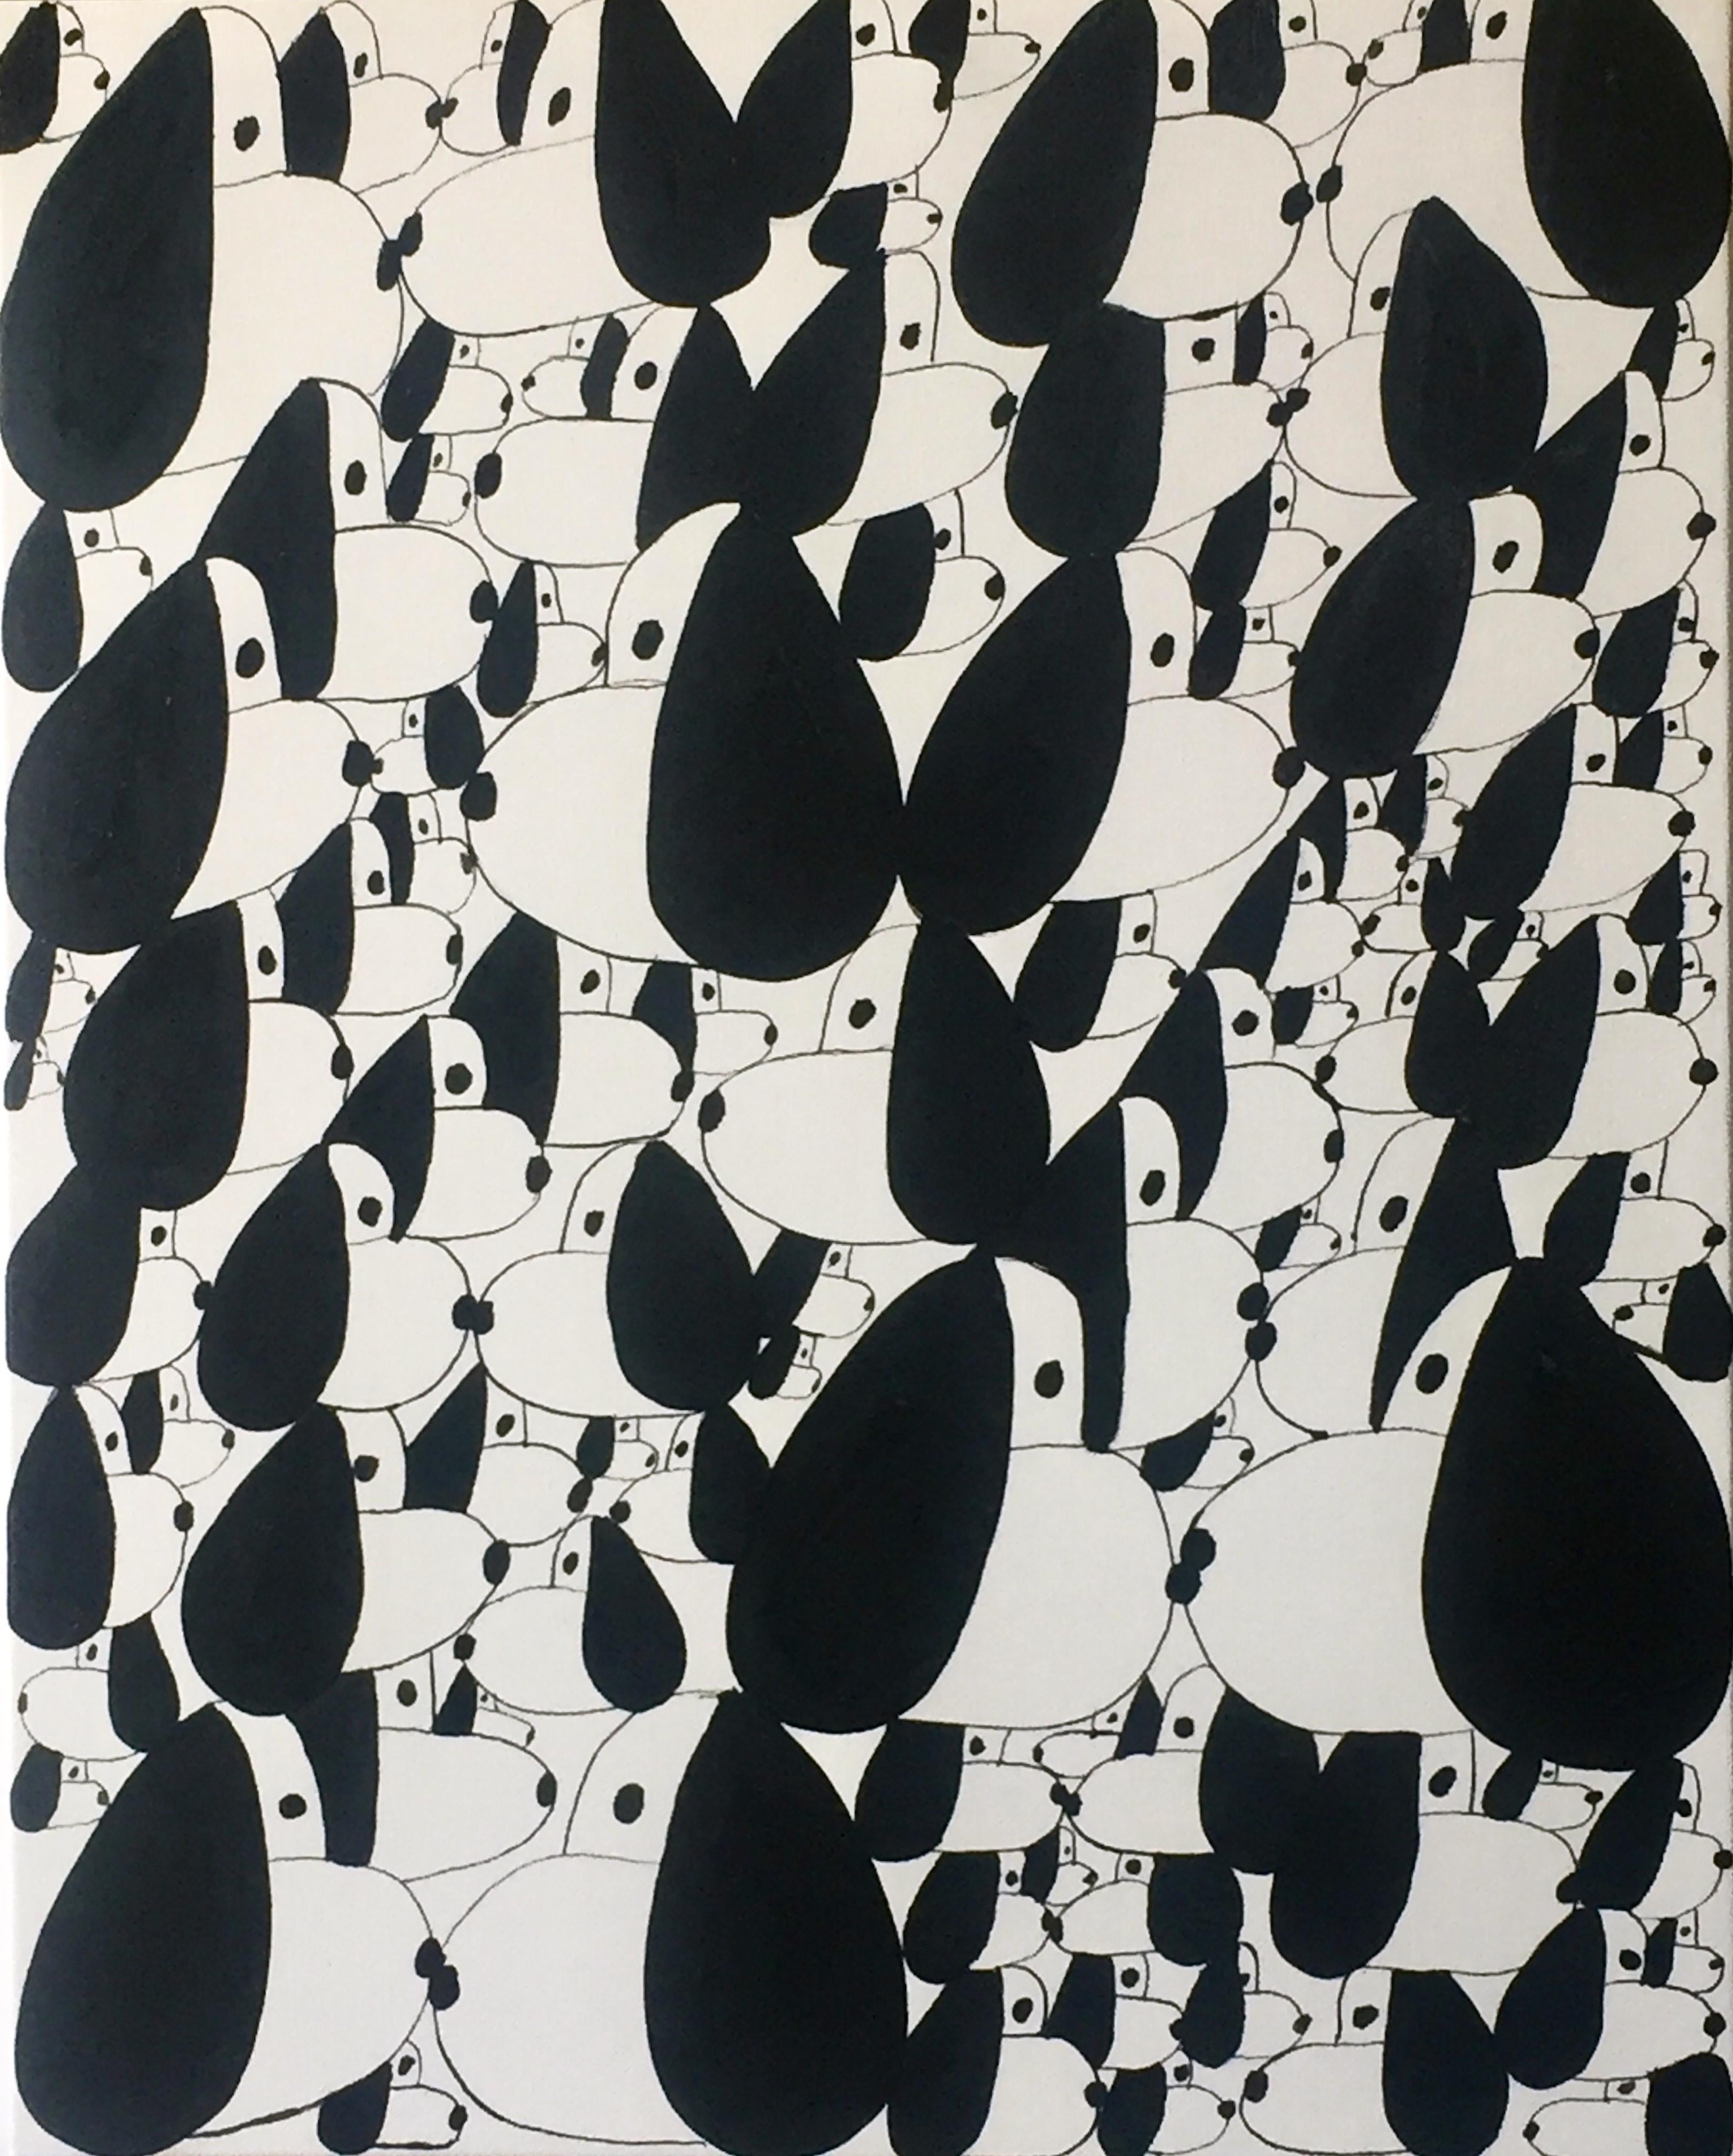 Animal Painting Nina Bovasso - Peinture sur toile noire et blanche "Snoopies in a Crowd" 16x20 inches